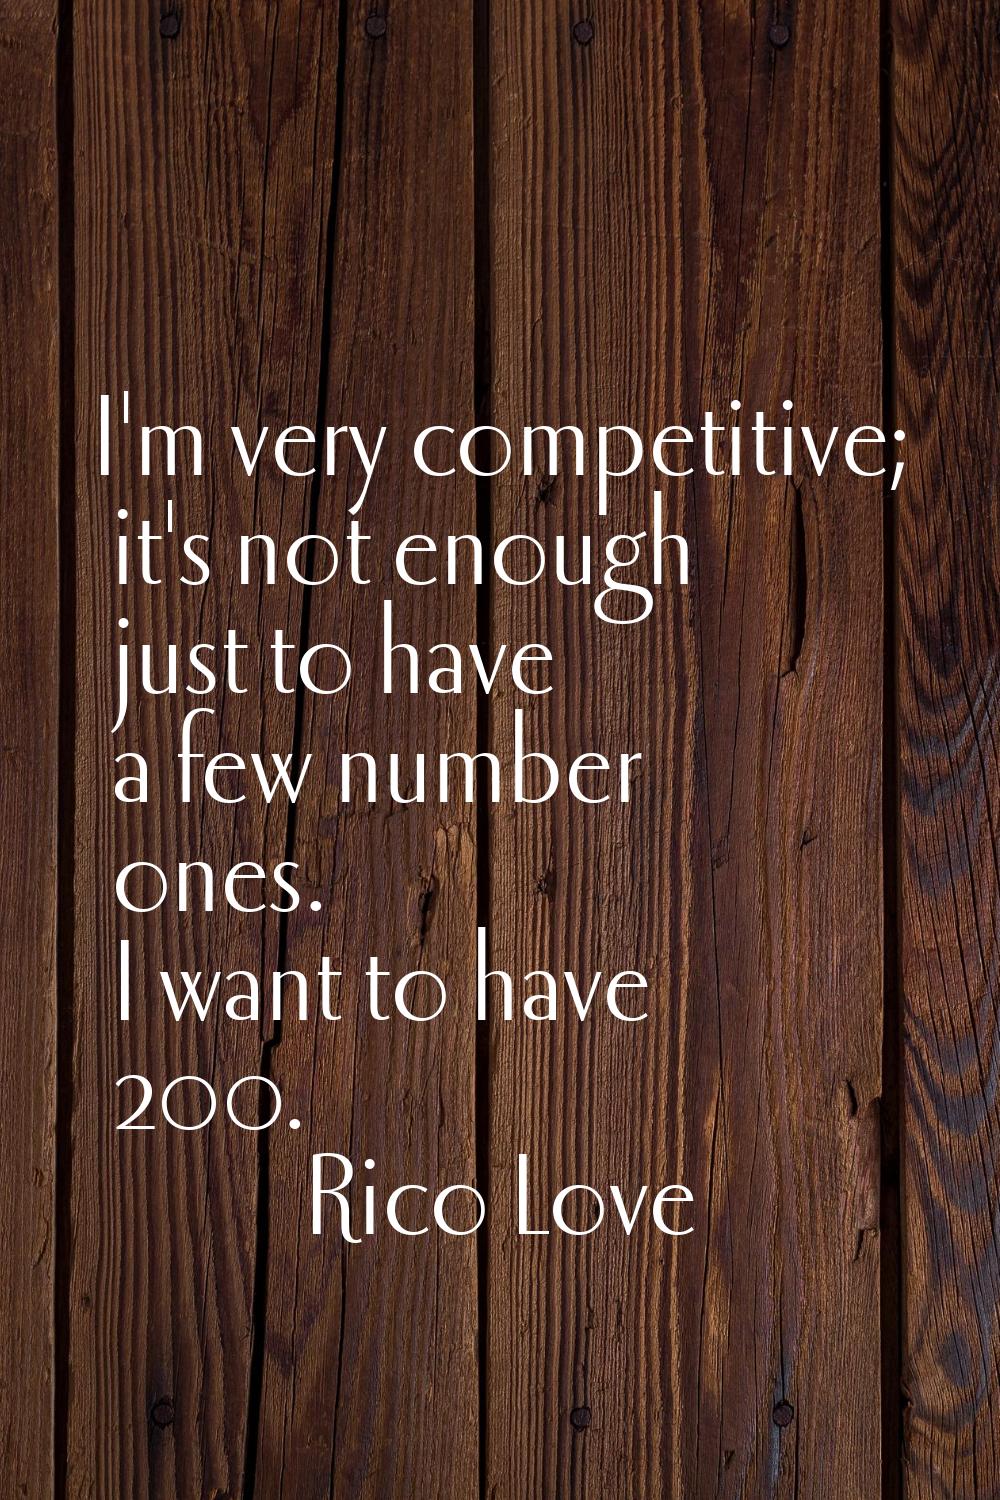 I'm very competitive; it's not enough just to have a few number ones. I want to have 200.